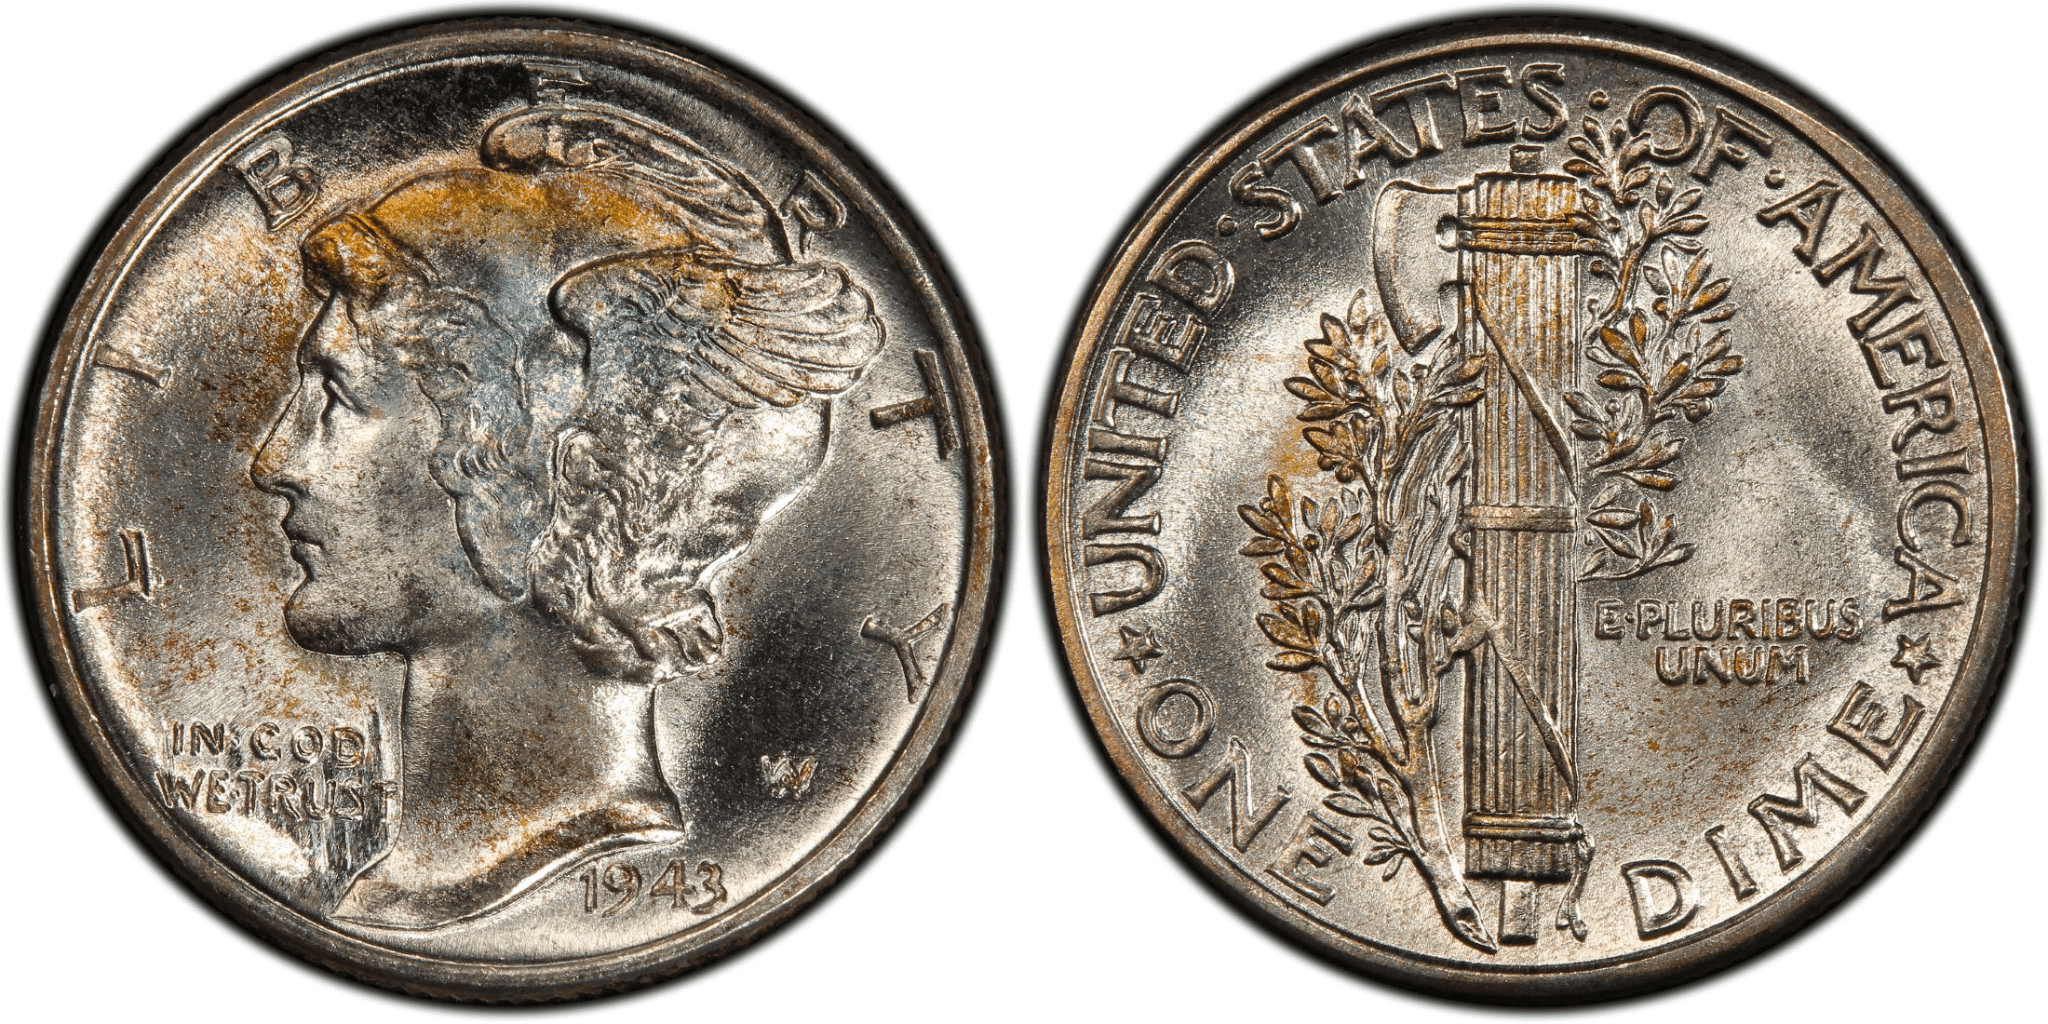 What Is the 1943 Mercury Dime Made Of